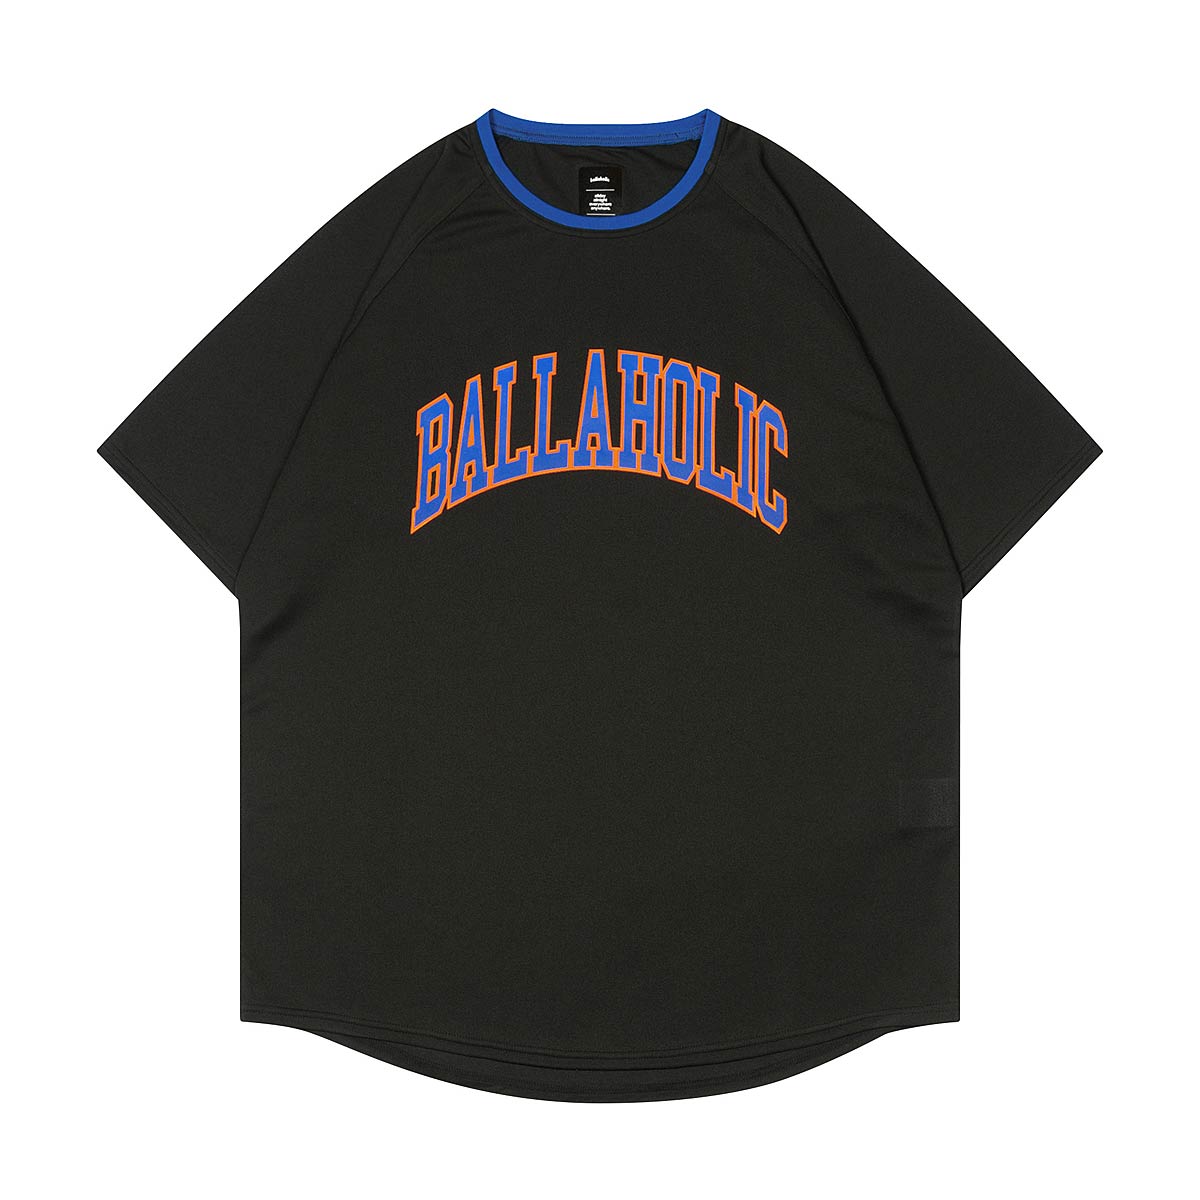 Image of Ballaholic College Logo Cool T-shirt, Black/blue/red